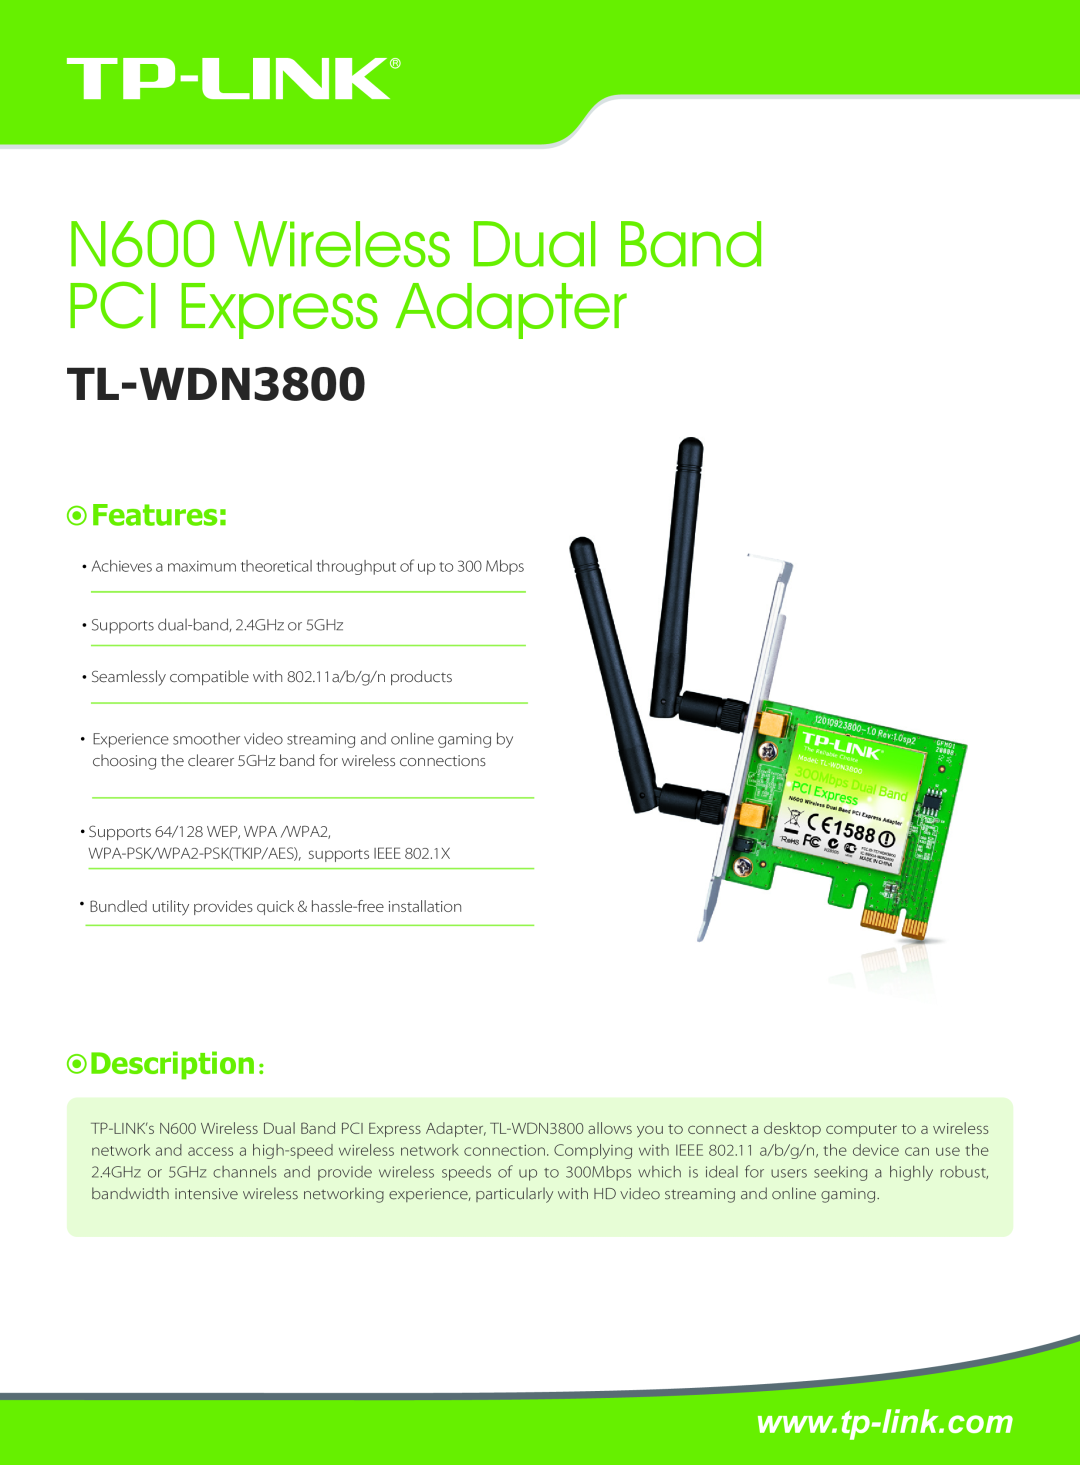 TP-Link TL-WDN3800 manual Features, Description：, Achieves a maximum theoretical throughput of up to 300 Mbps 